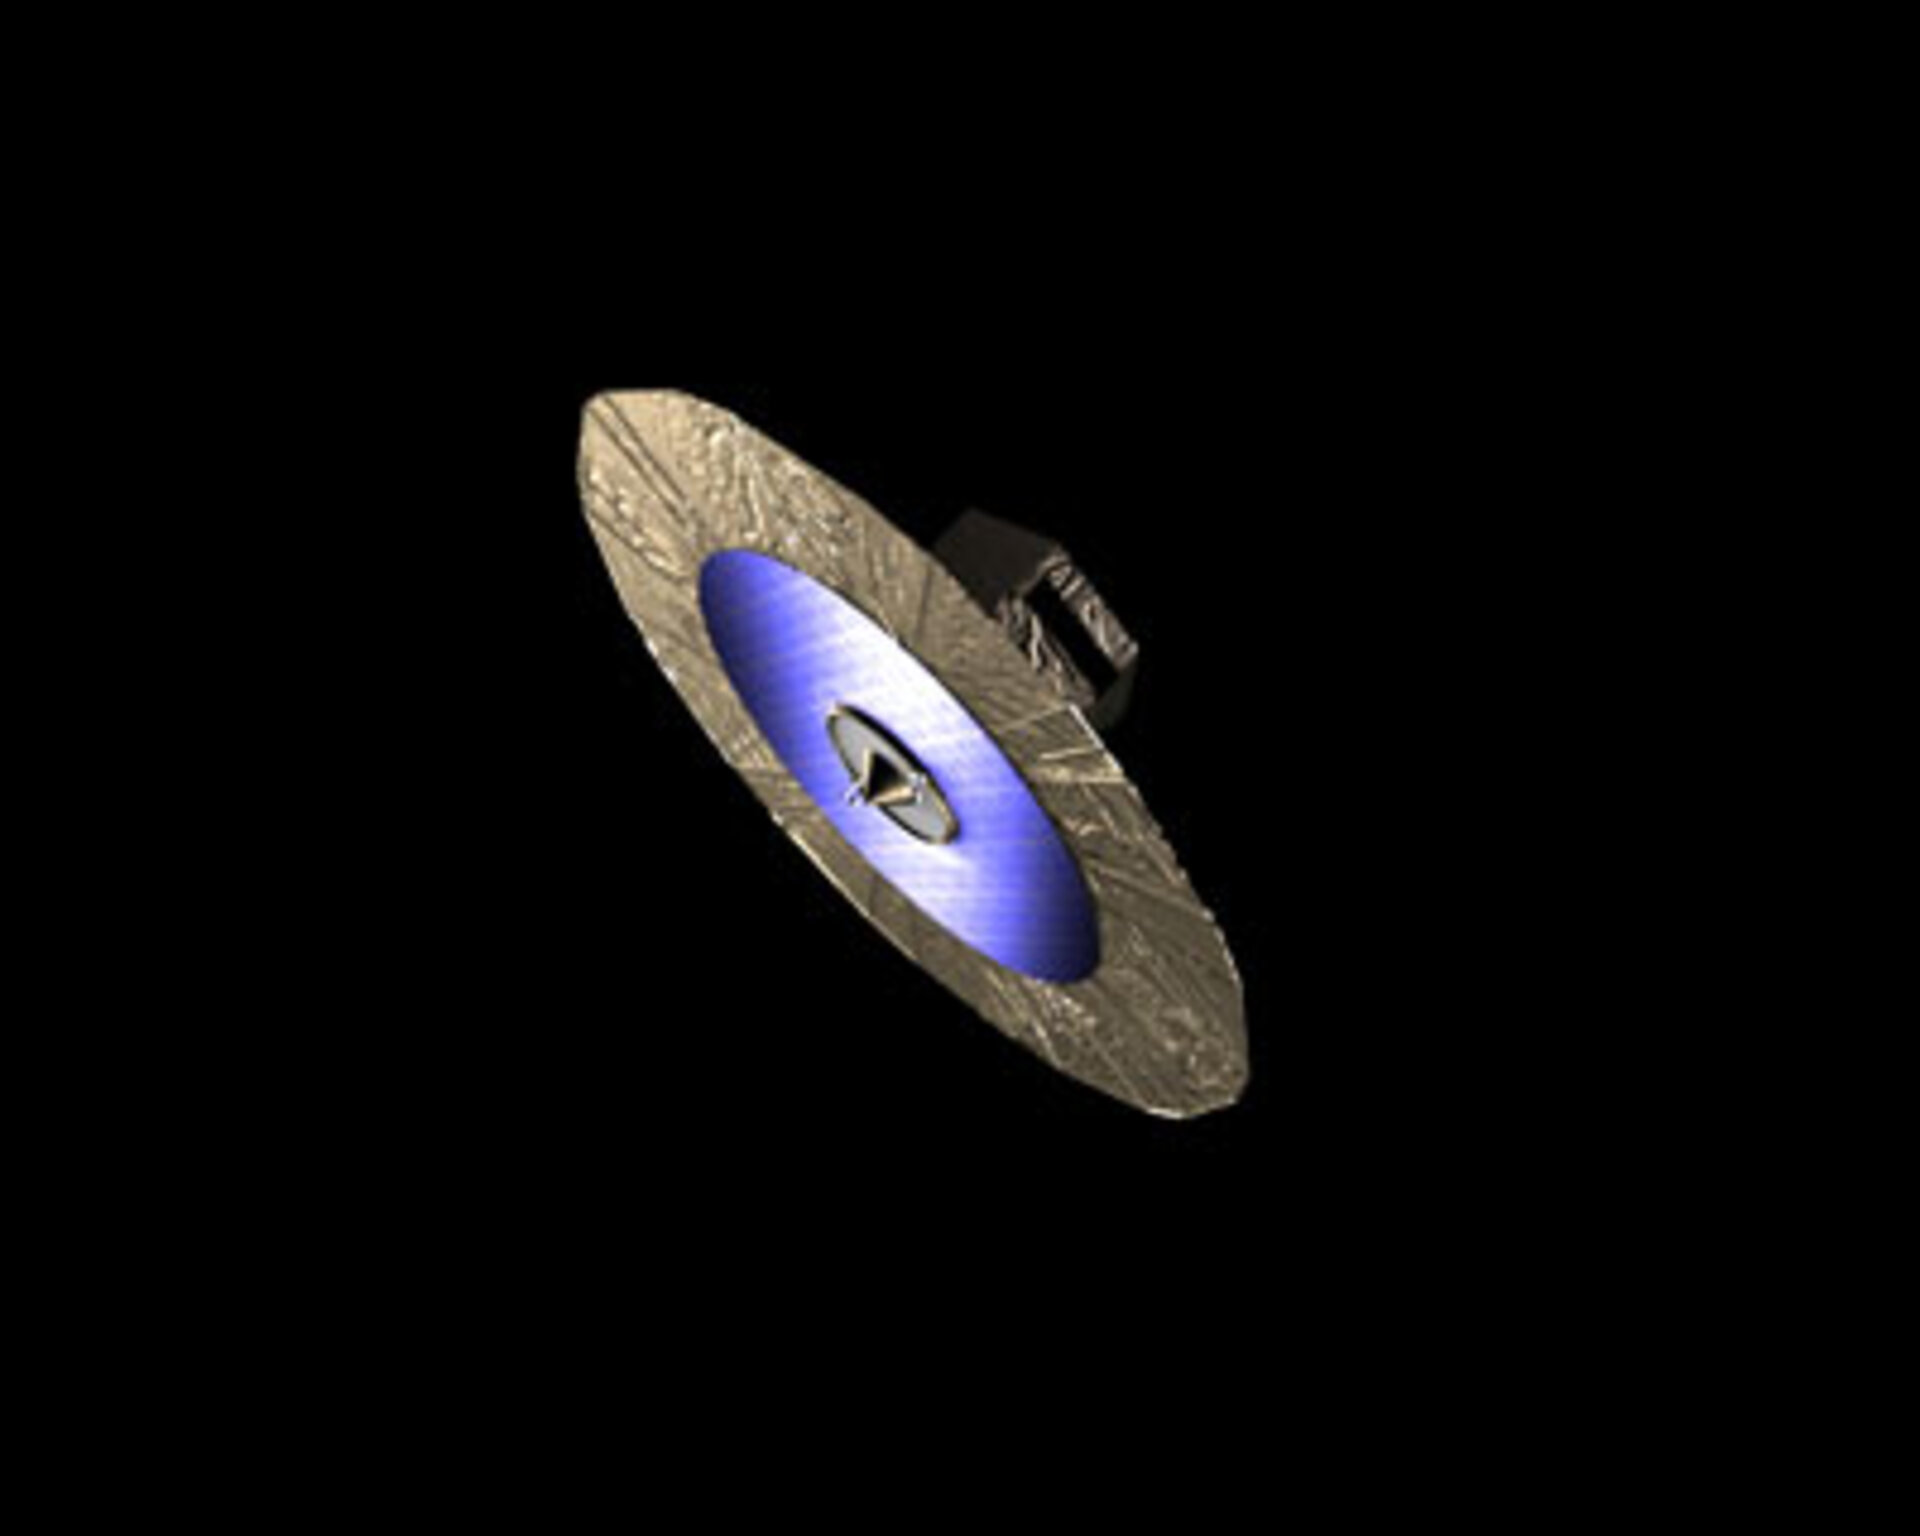 Gaia spacecraft showing deployed sunshield and solar arrays